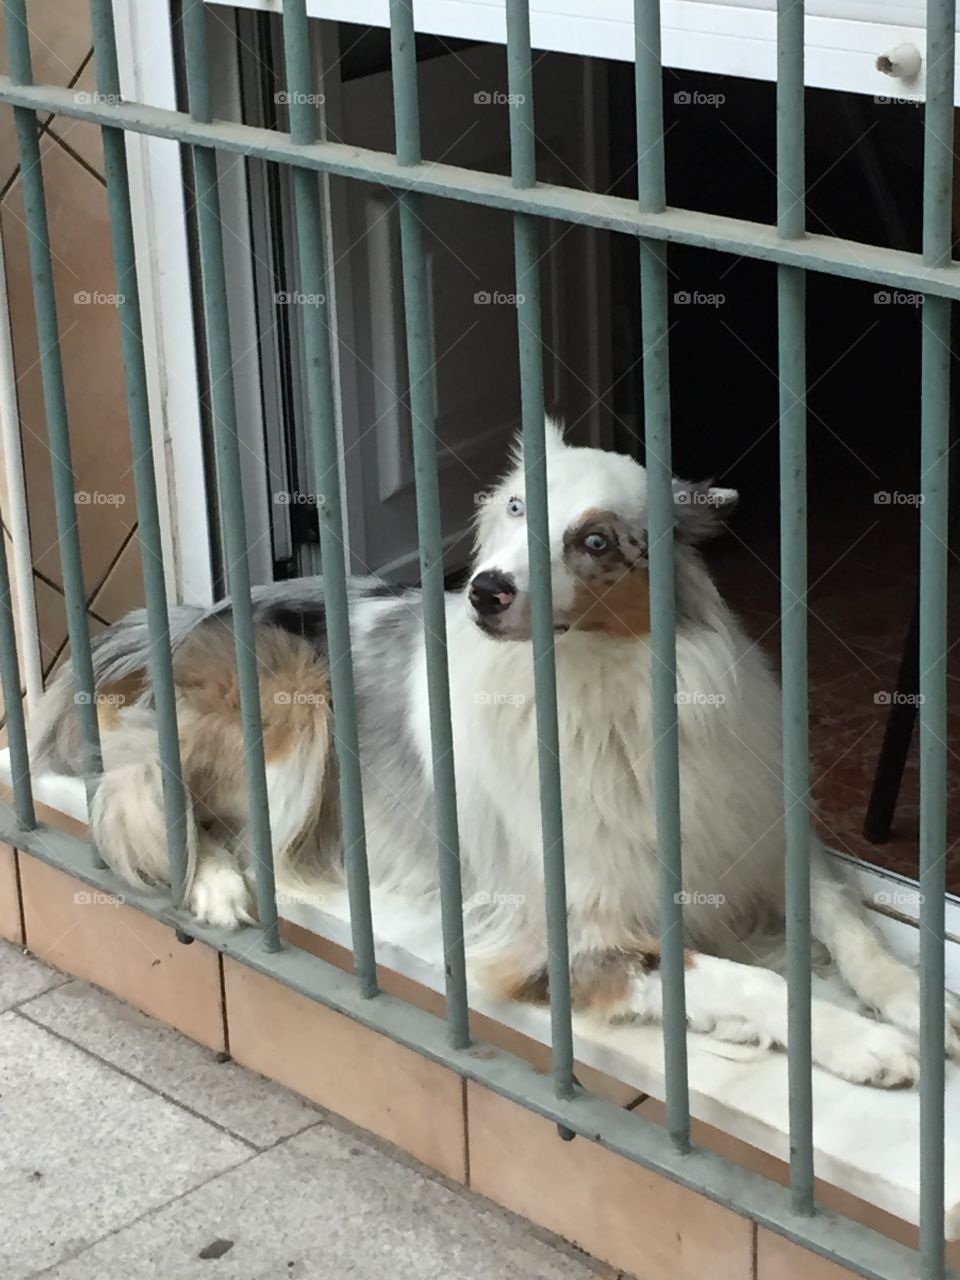 Dog behind bars with white eye. Saw this dog while walking, seemed a bit bores but beautiful white eyes!
